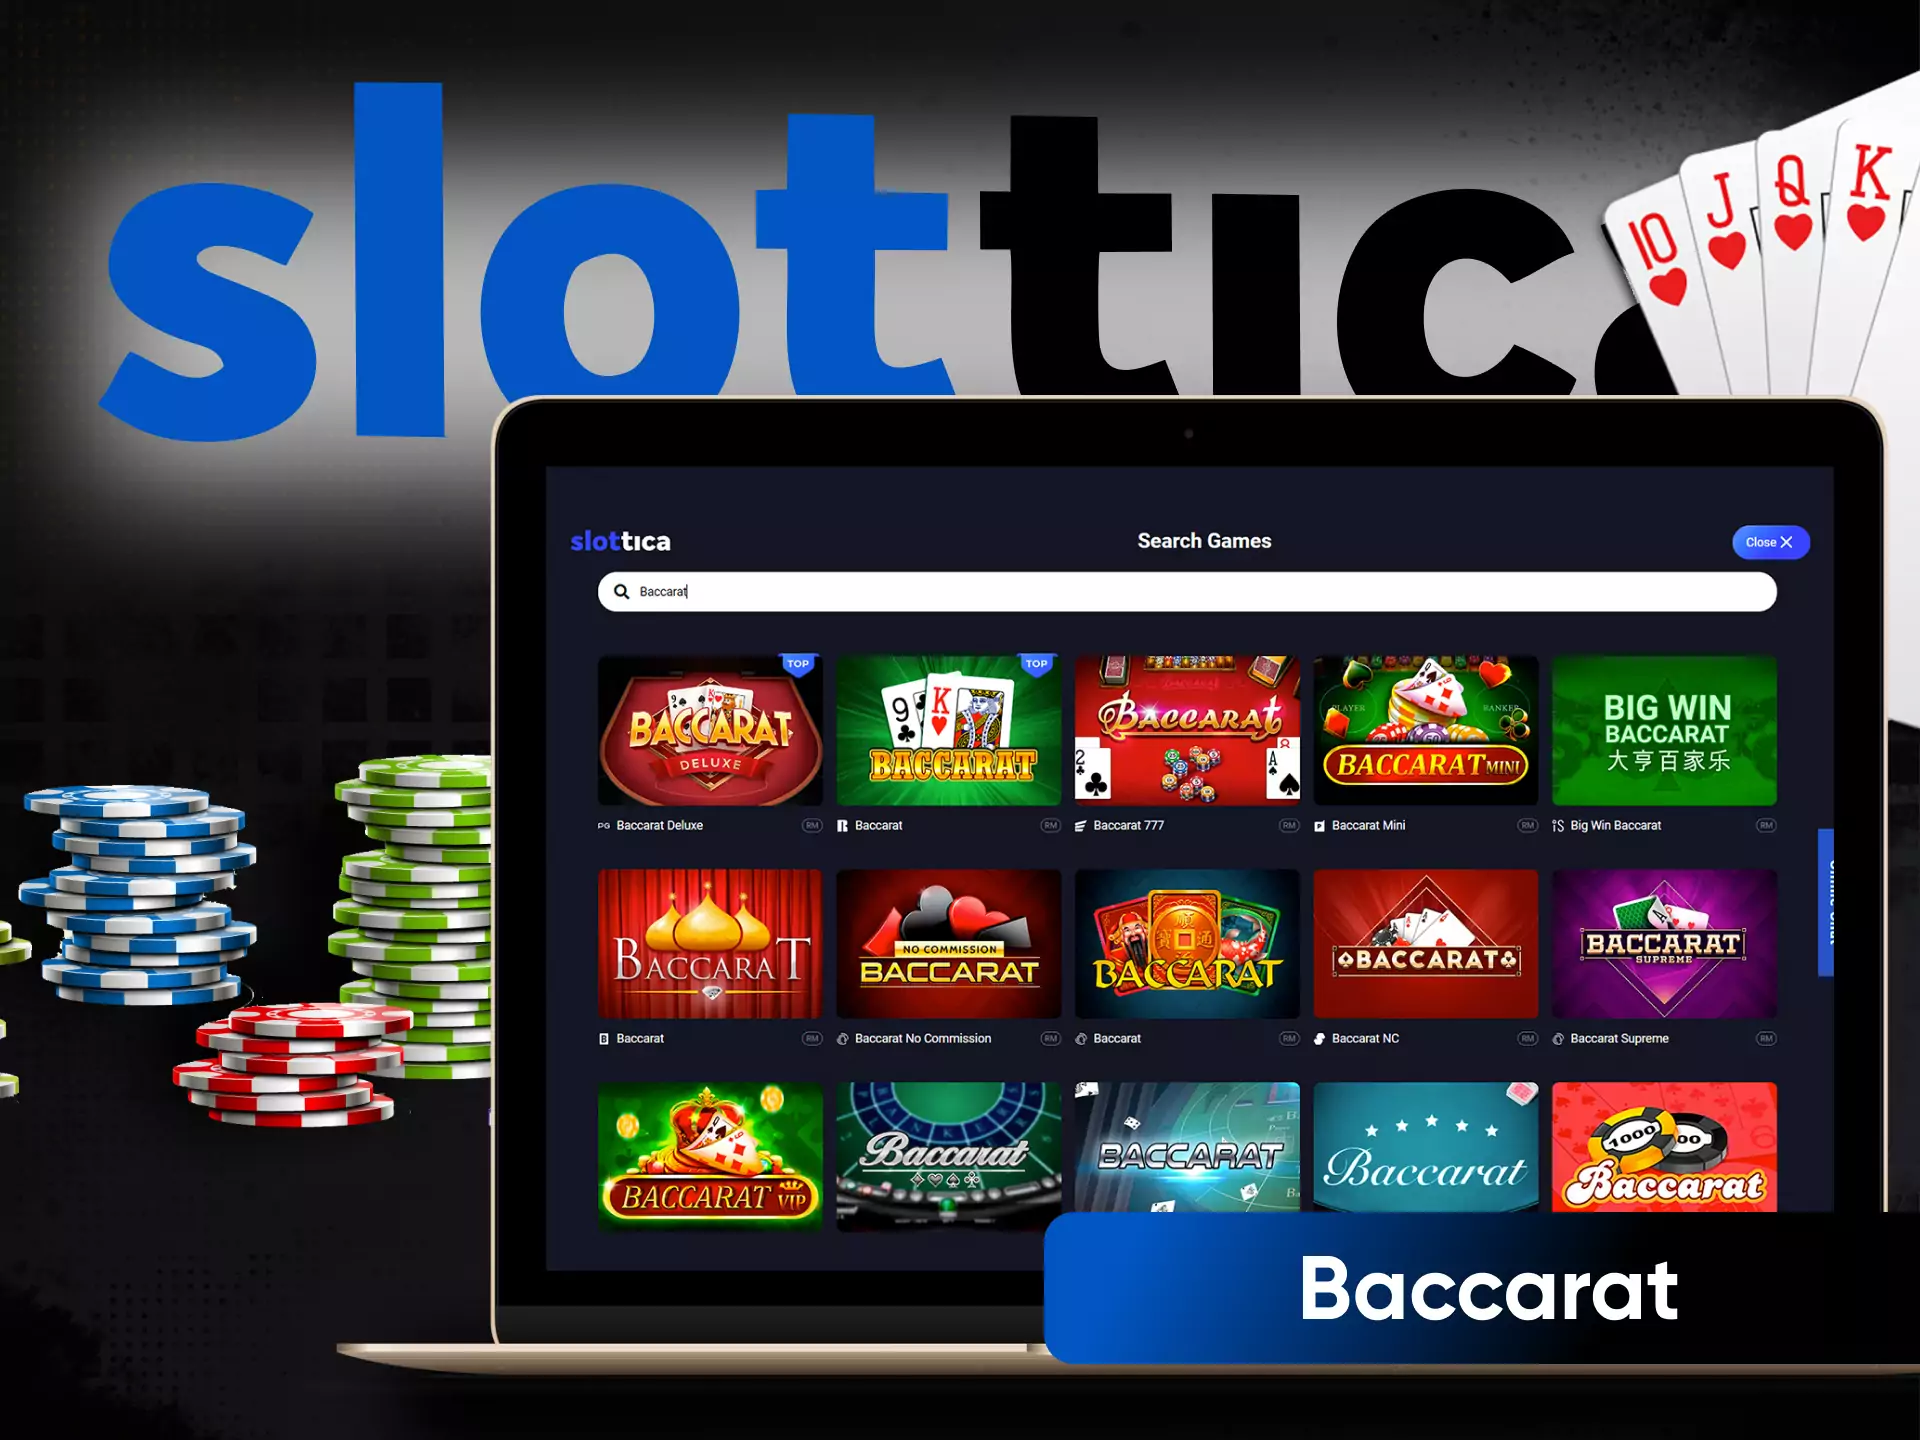 In the Slottica Casino, you can play baccarat online.